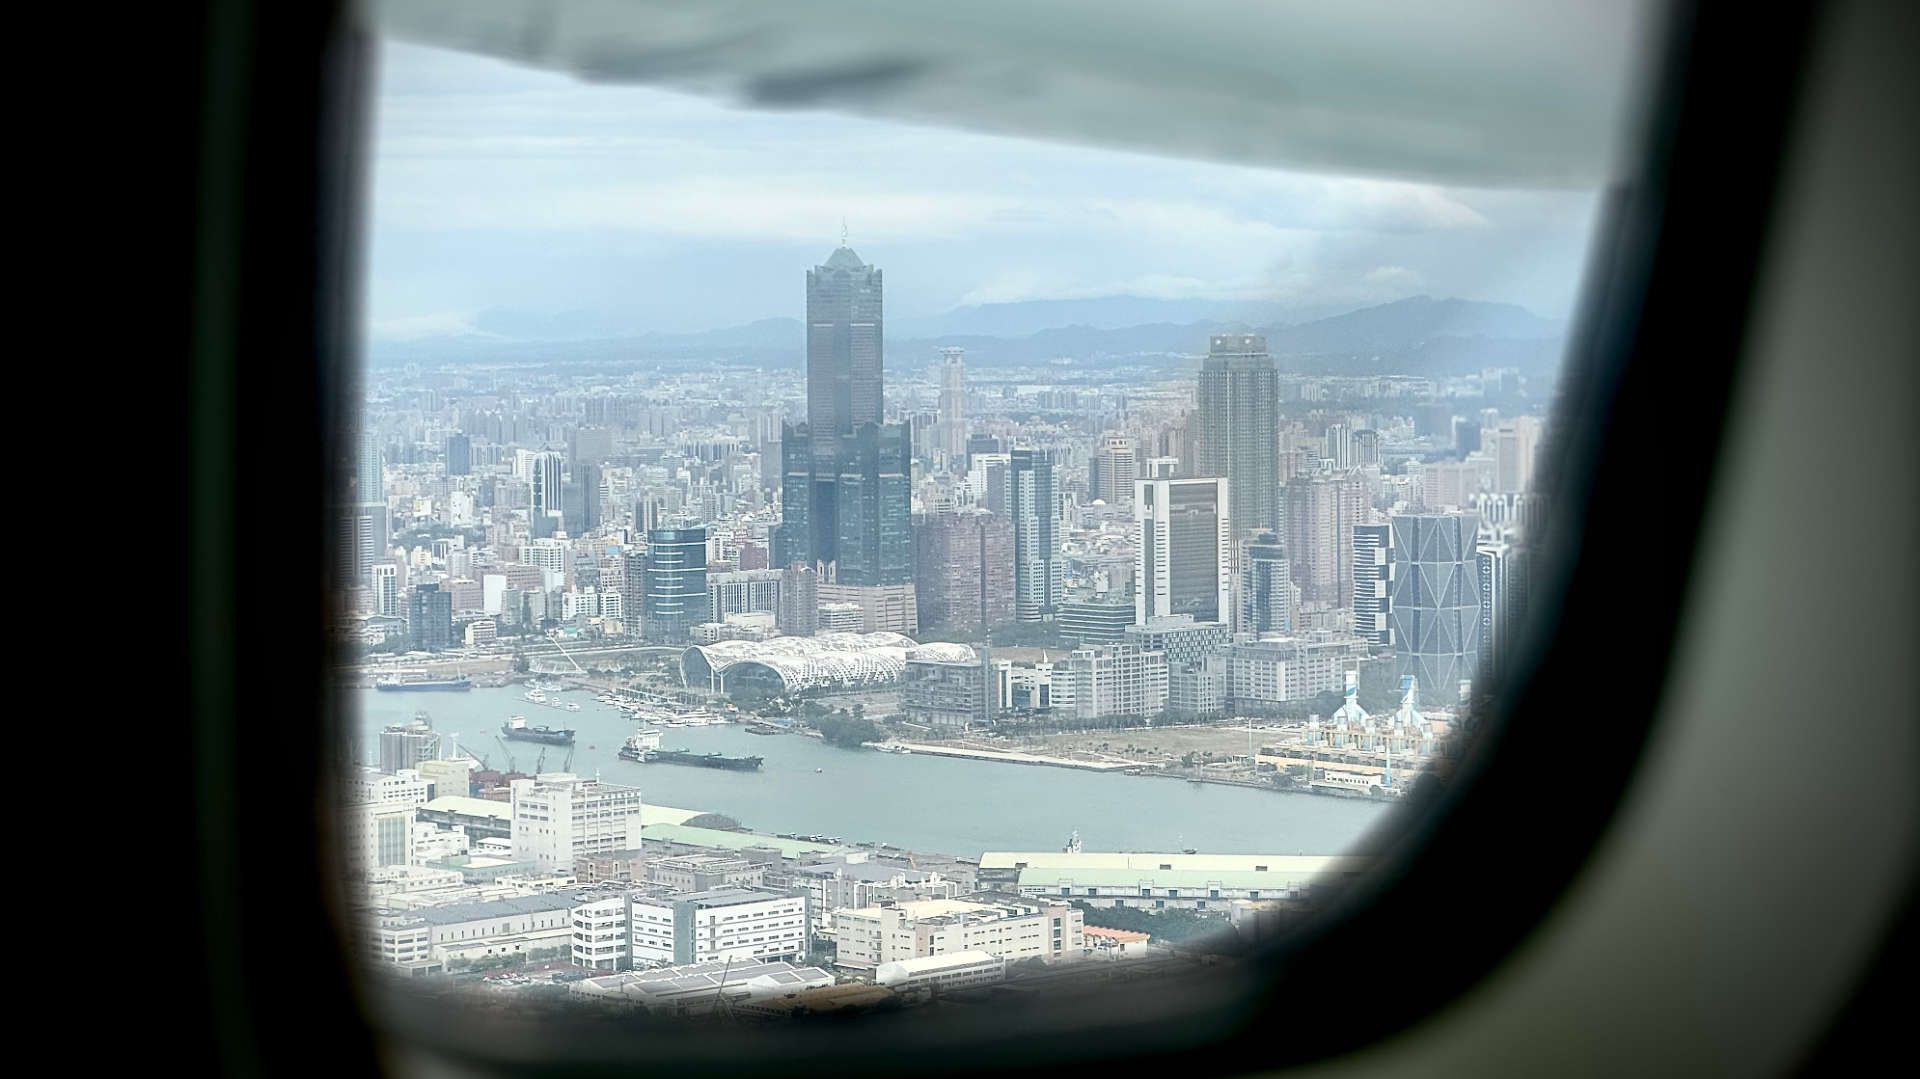 Aerial view of central Kaohsiung, taken through an airplane window. Landmarks including 85 Sky Tower, Kaohsiung Exhibition Center, Kaohsiung Public Library, and China Steel Building, are clearly visible.